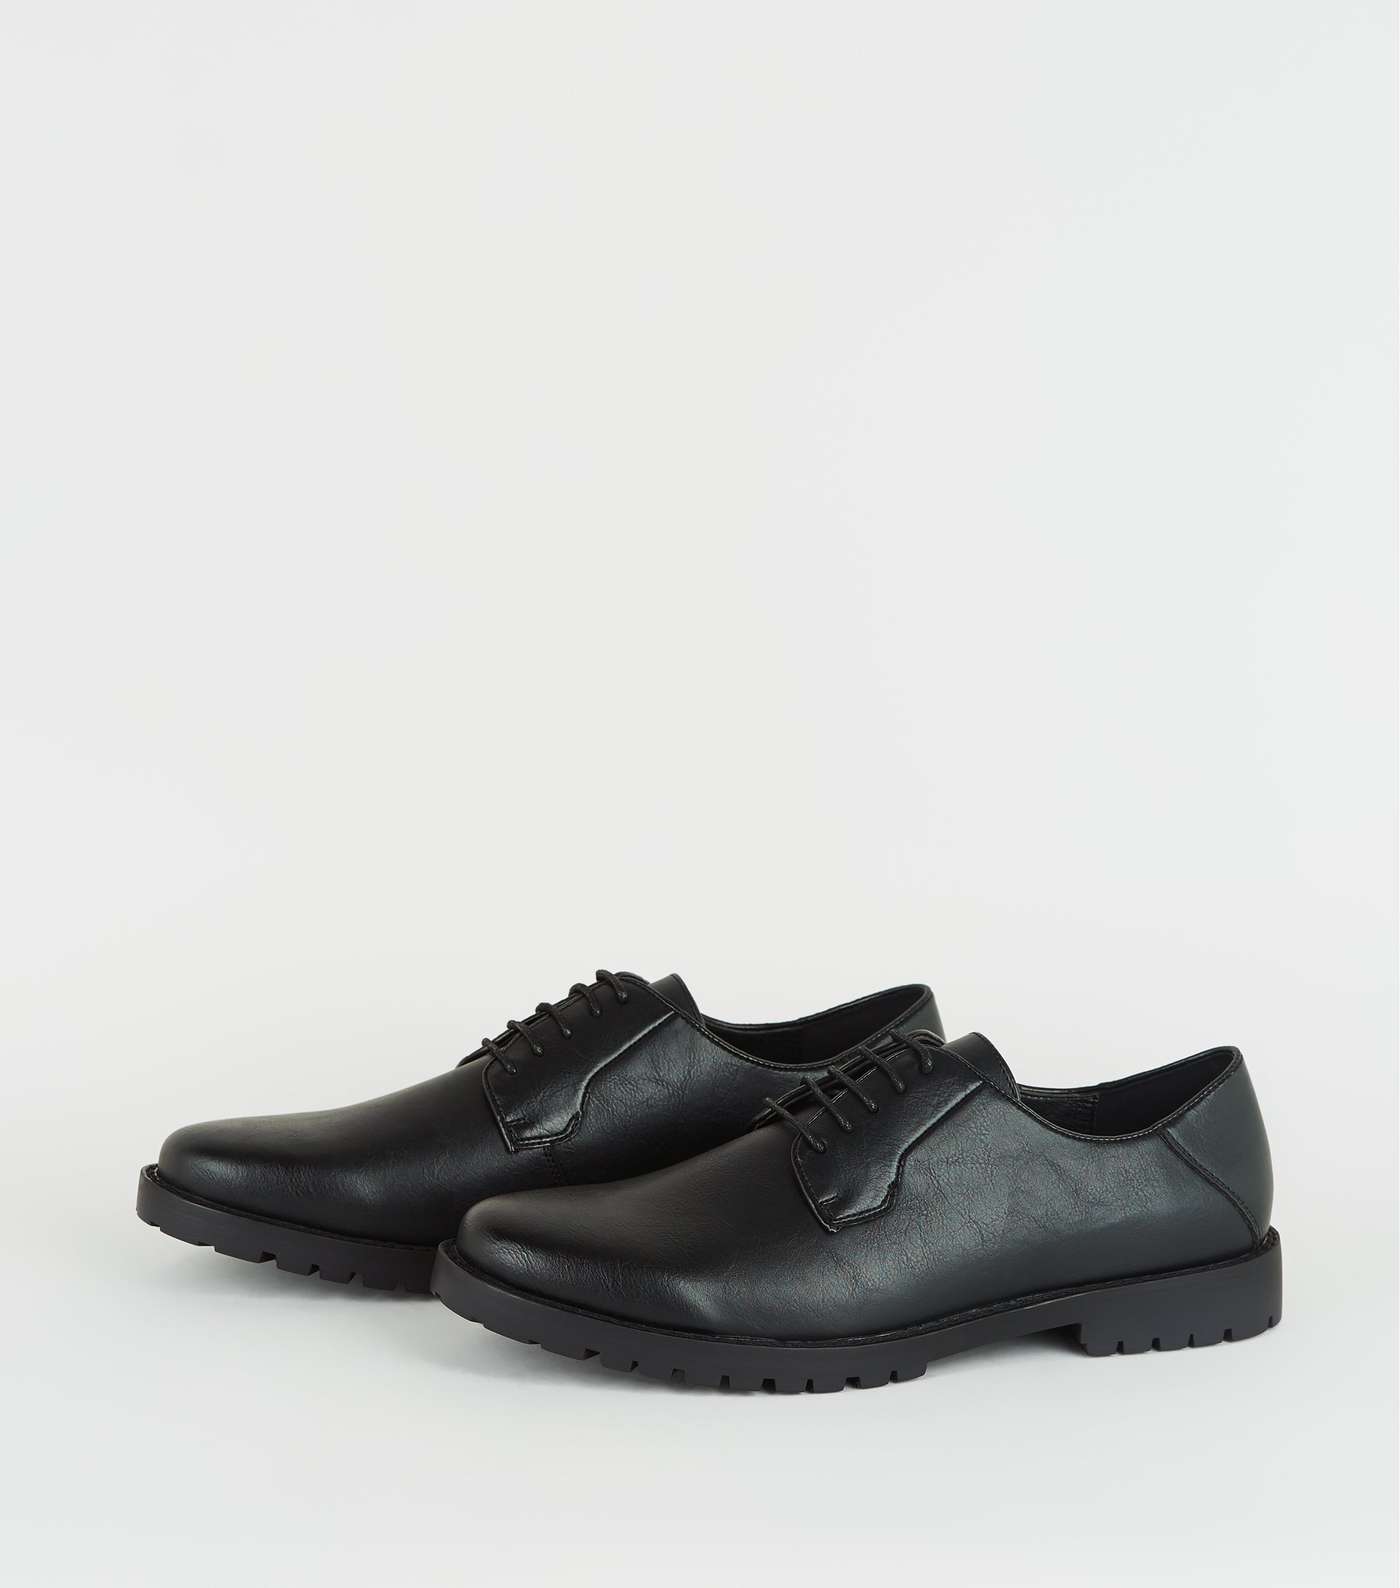 Black Leather-Look Cleated Derby Shoes Image 3